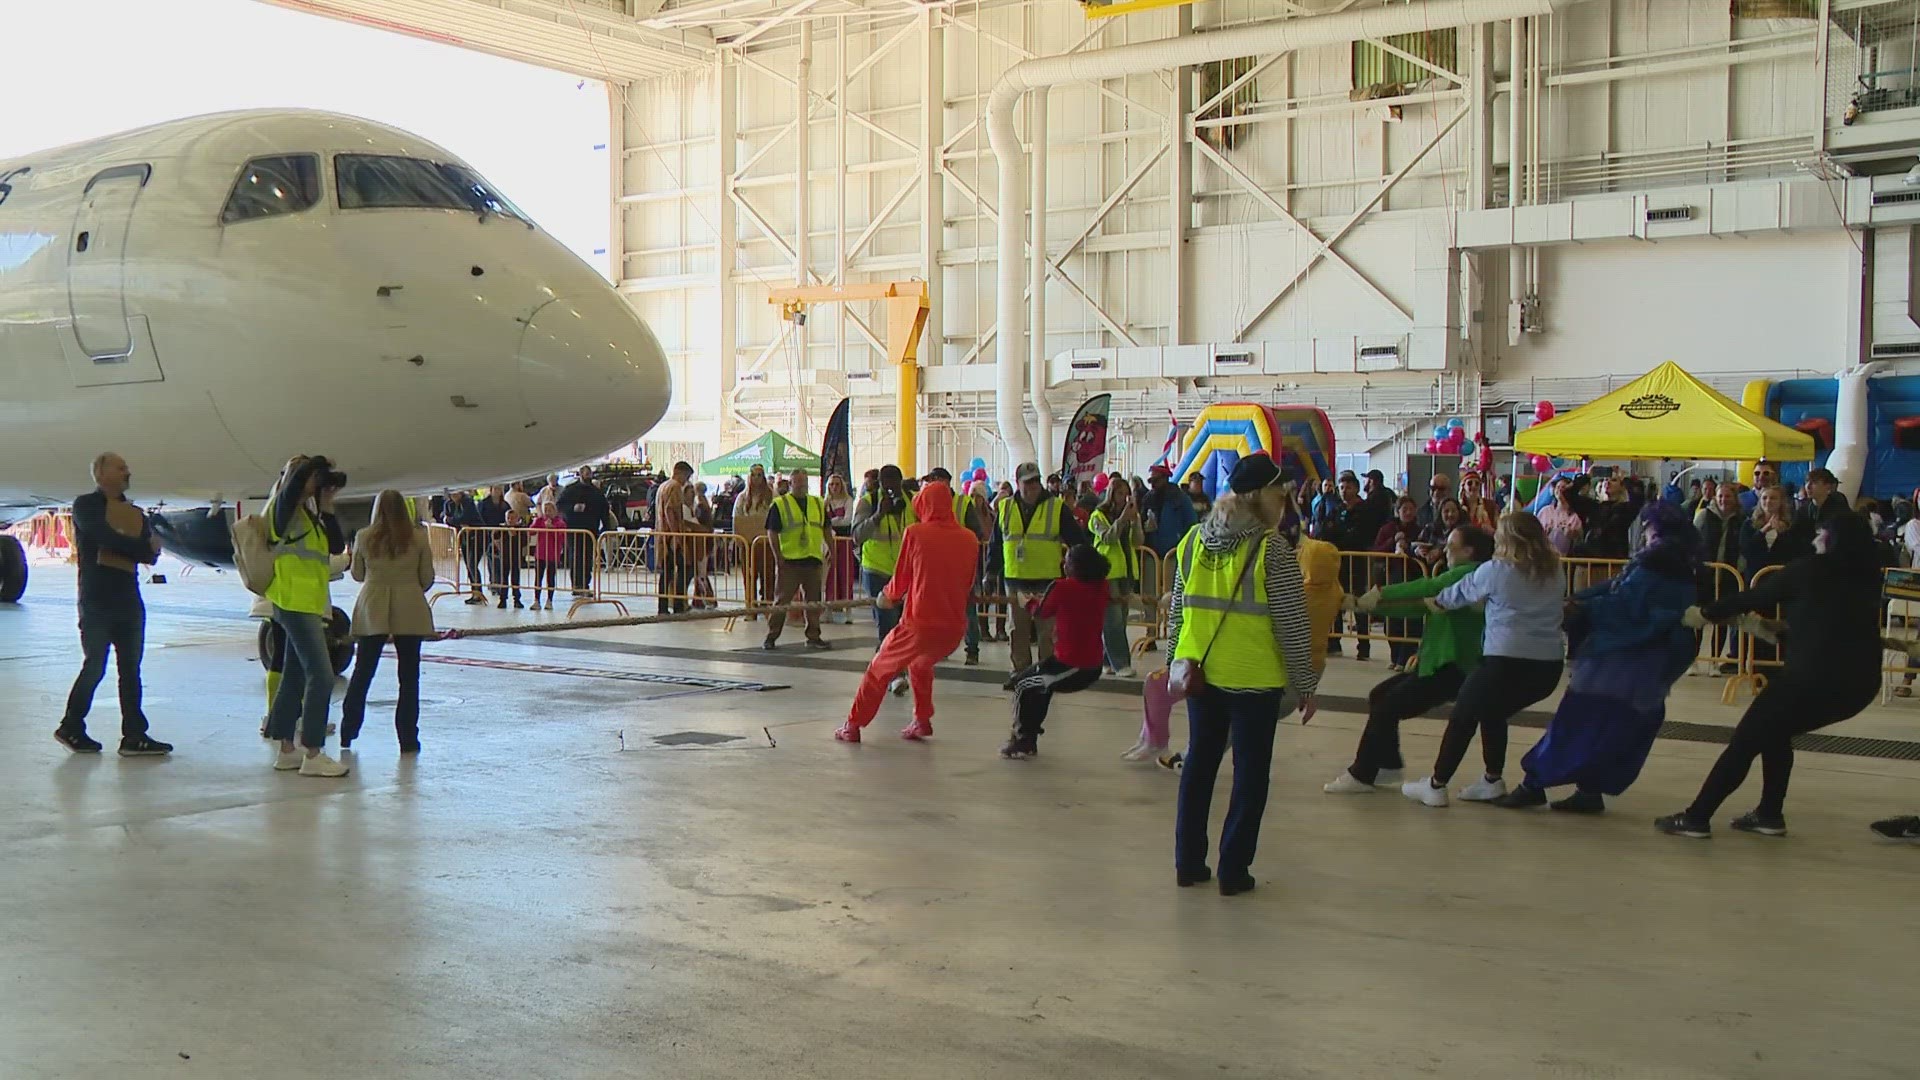 The 12th annual "Republic Airways Plane Pull" benefitted charities to help kids battling serious diseases.